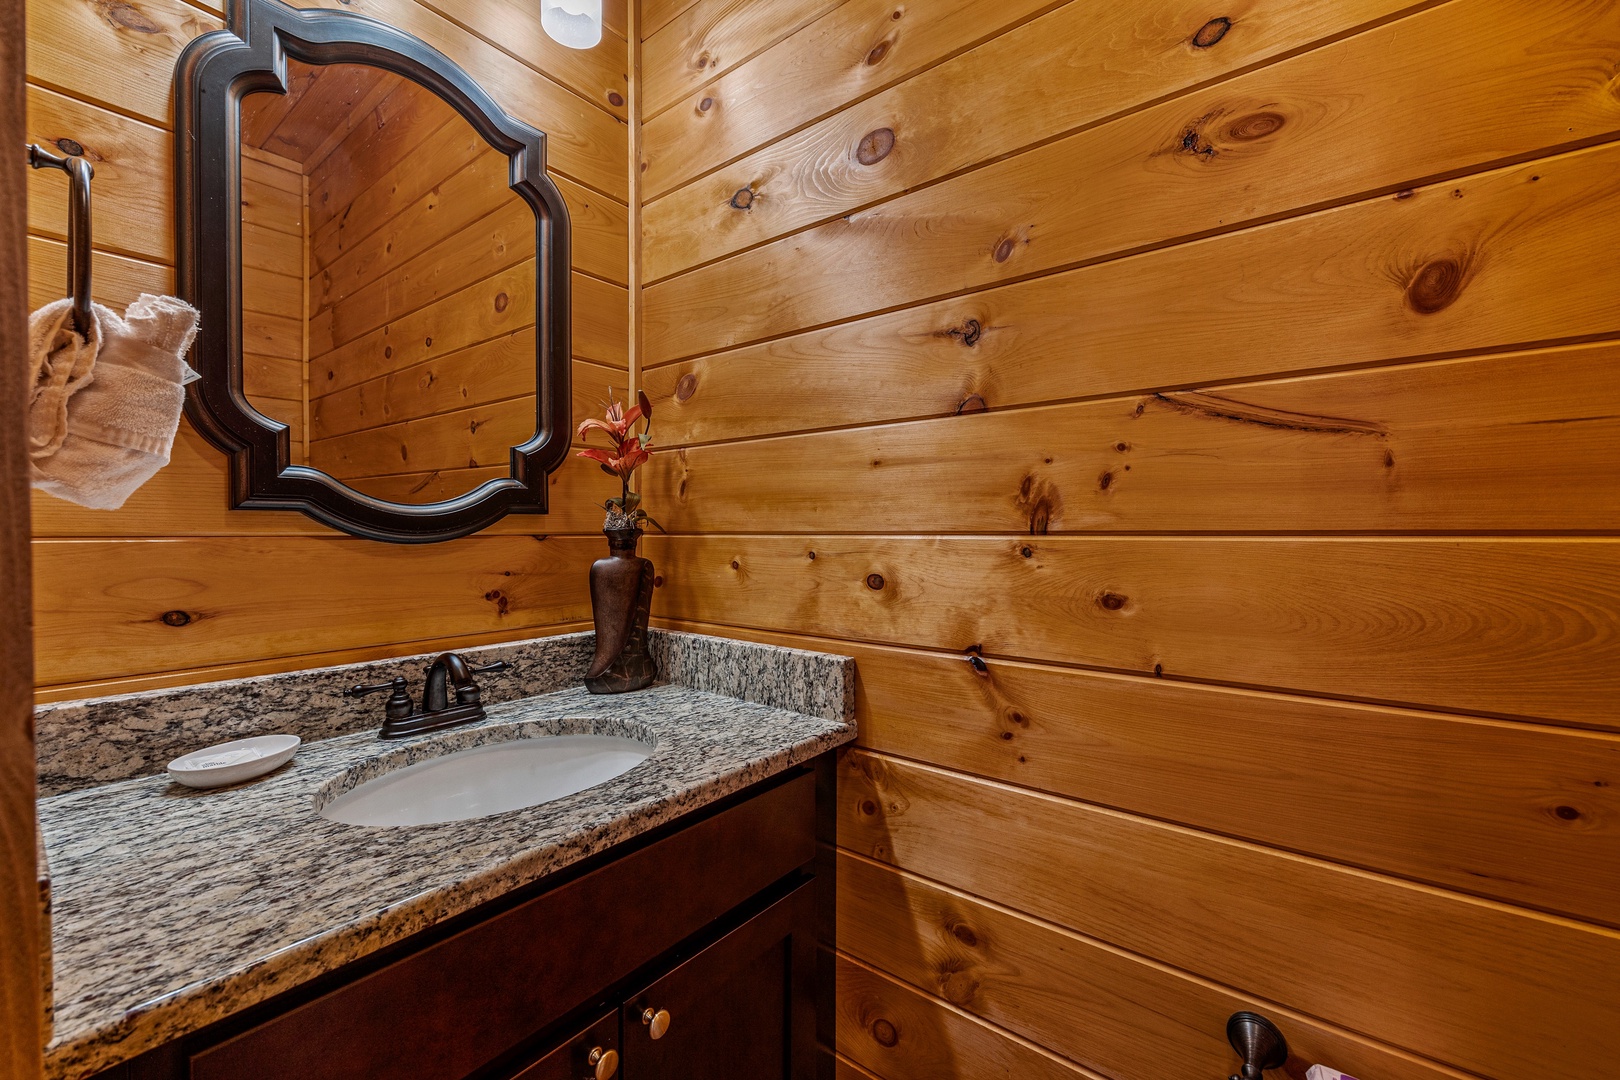 Bathroom sink and mirror at Four Seasons Grand, a 5 bedroom cabin rental located in Pigeon Forge